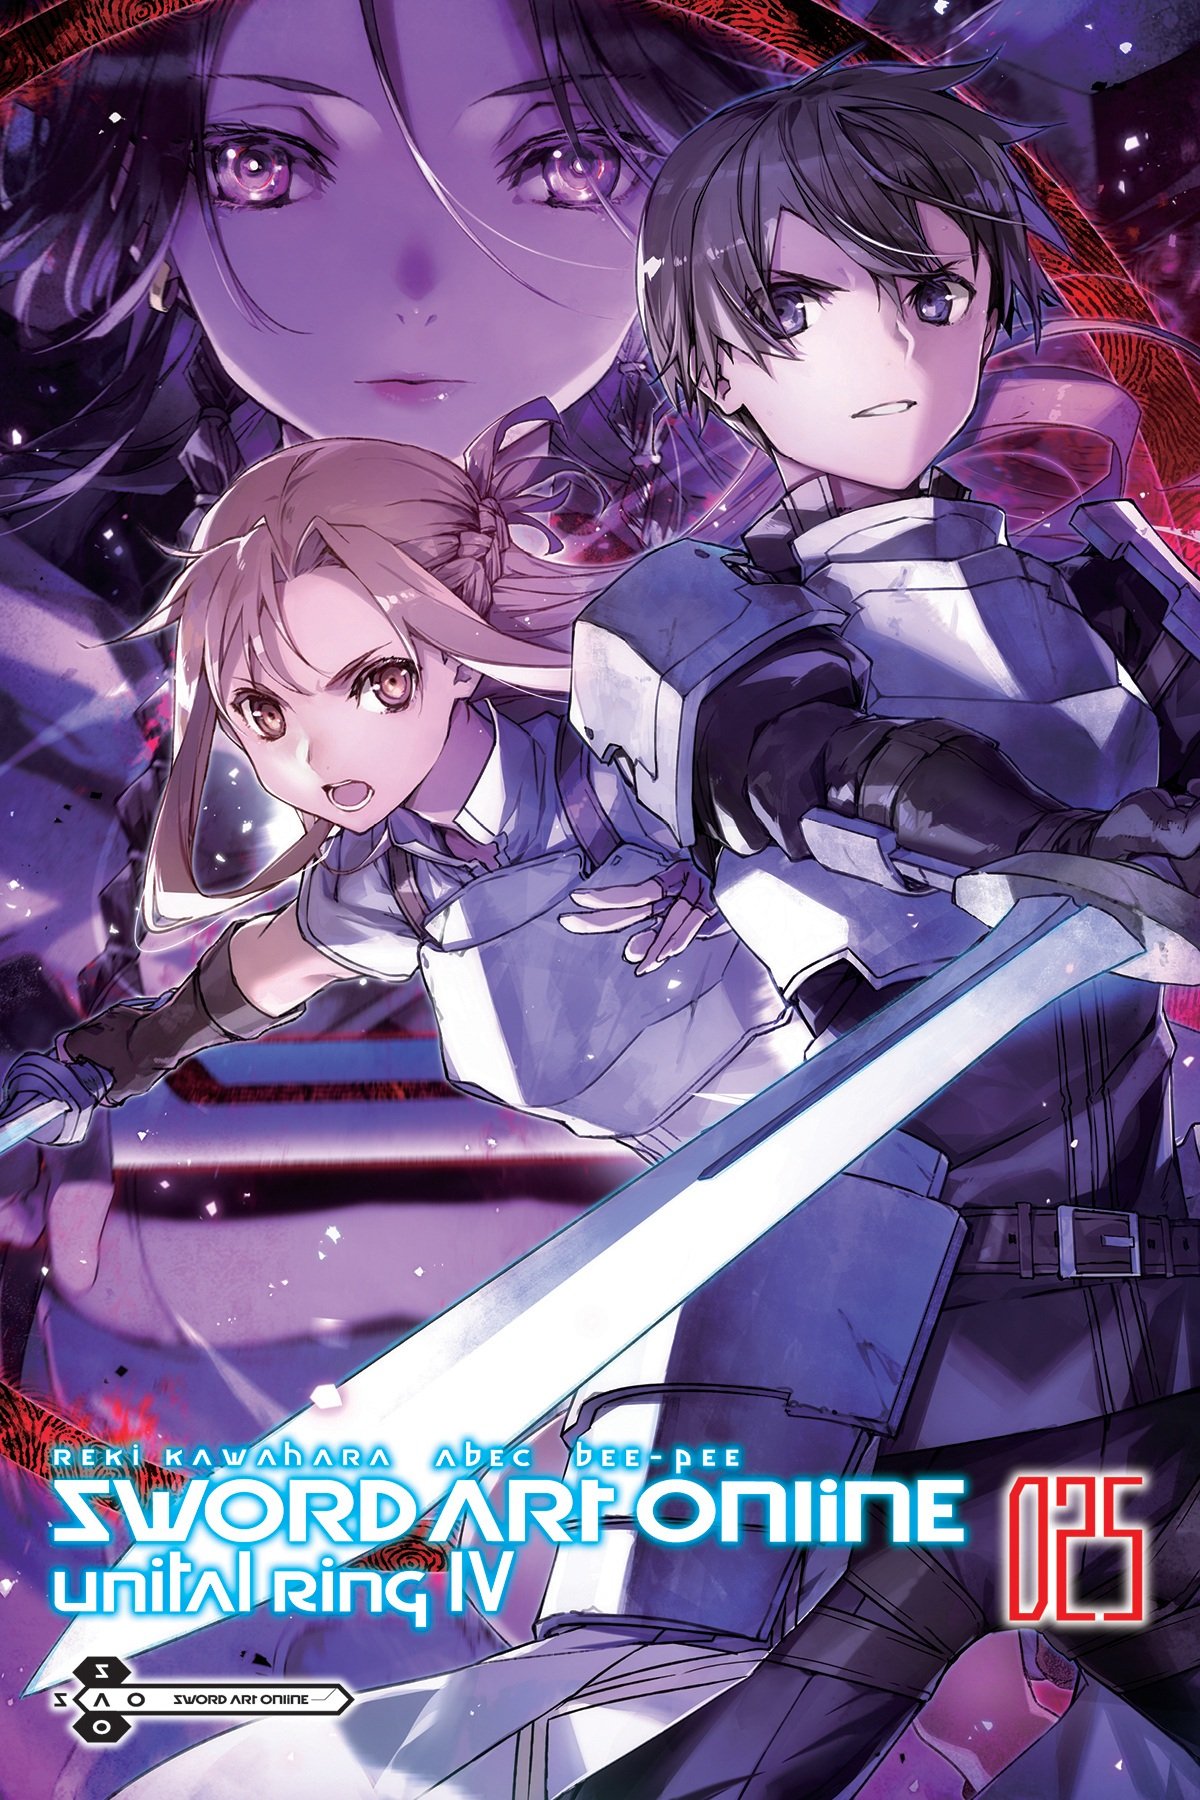 SAO Wikia on X: Sword Art Online Volume 18, Alicization Lasting english  translation by @yenpress is scheduled for December 17. Given the previous  couple of volume releases, prepare for possible delays.   /